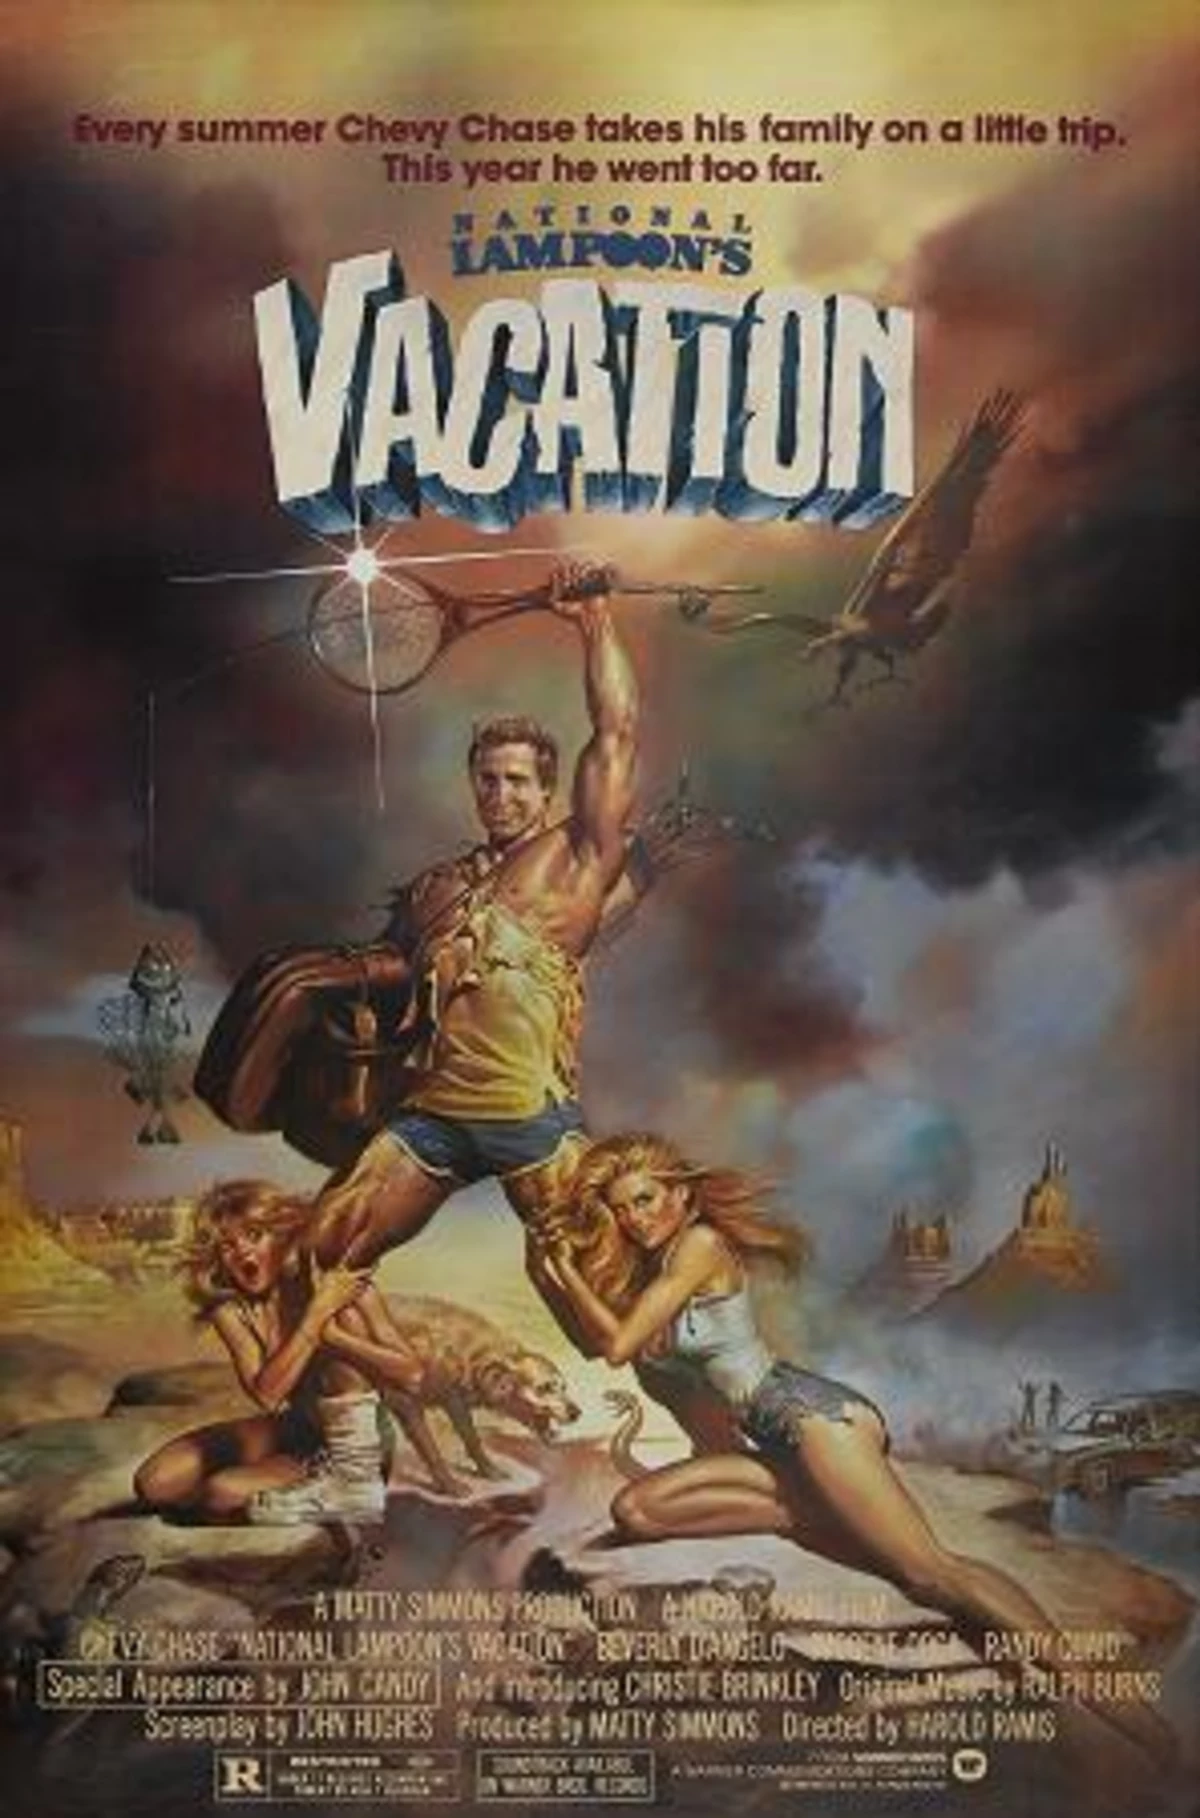 Trailer for New Vacation Movie Released